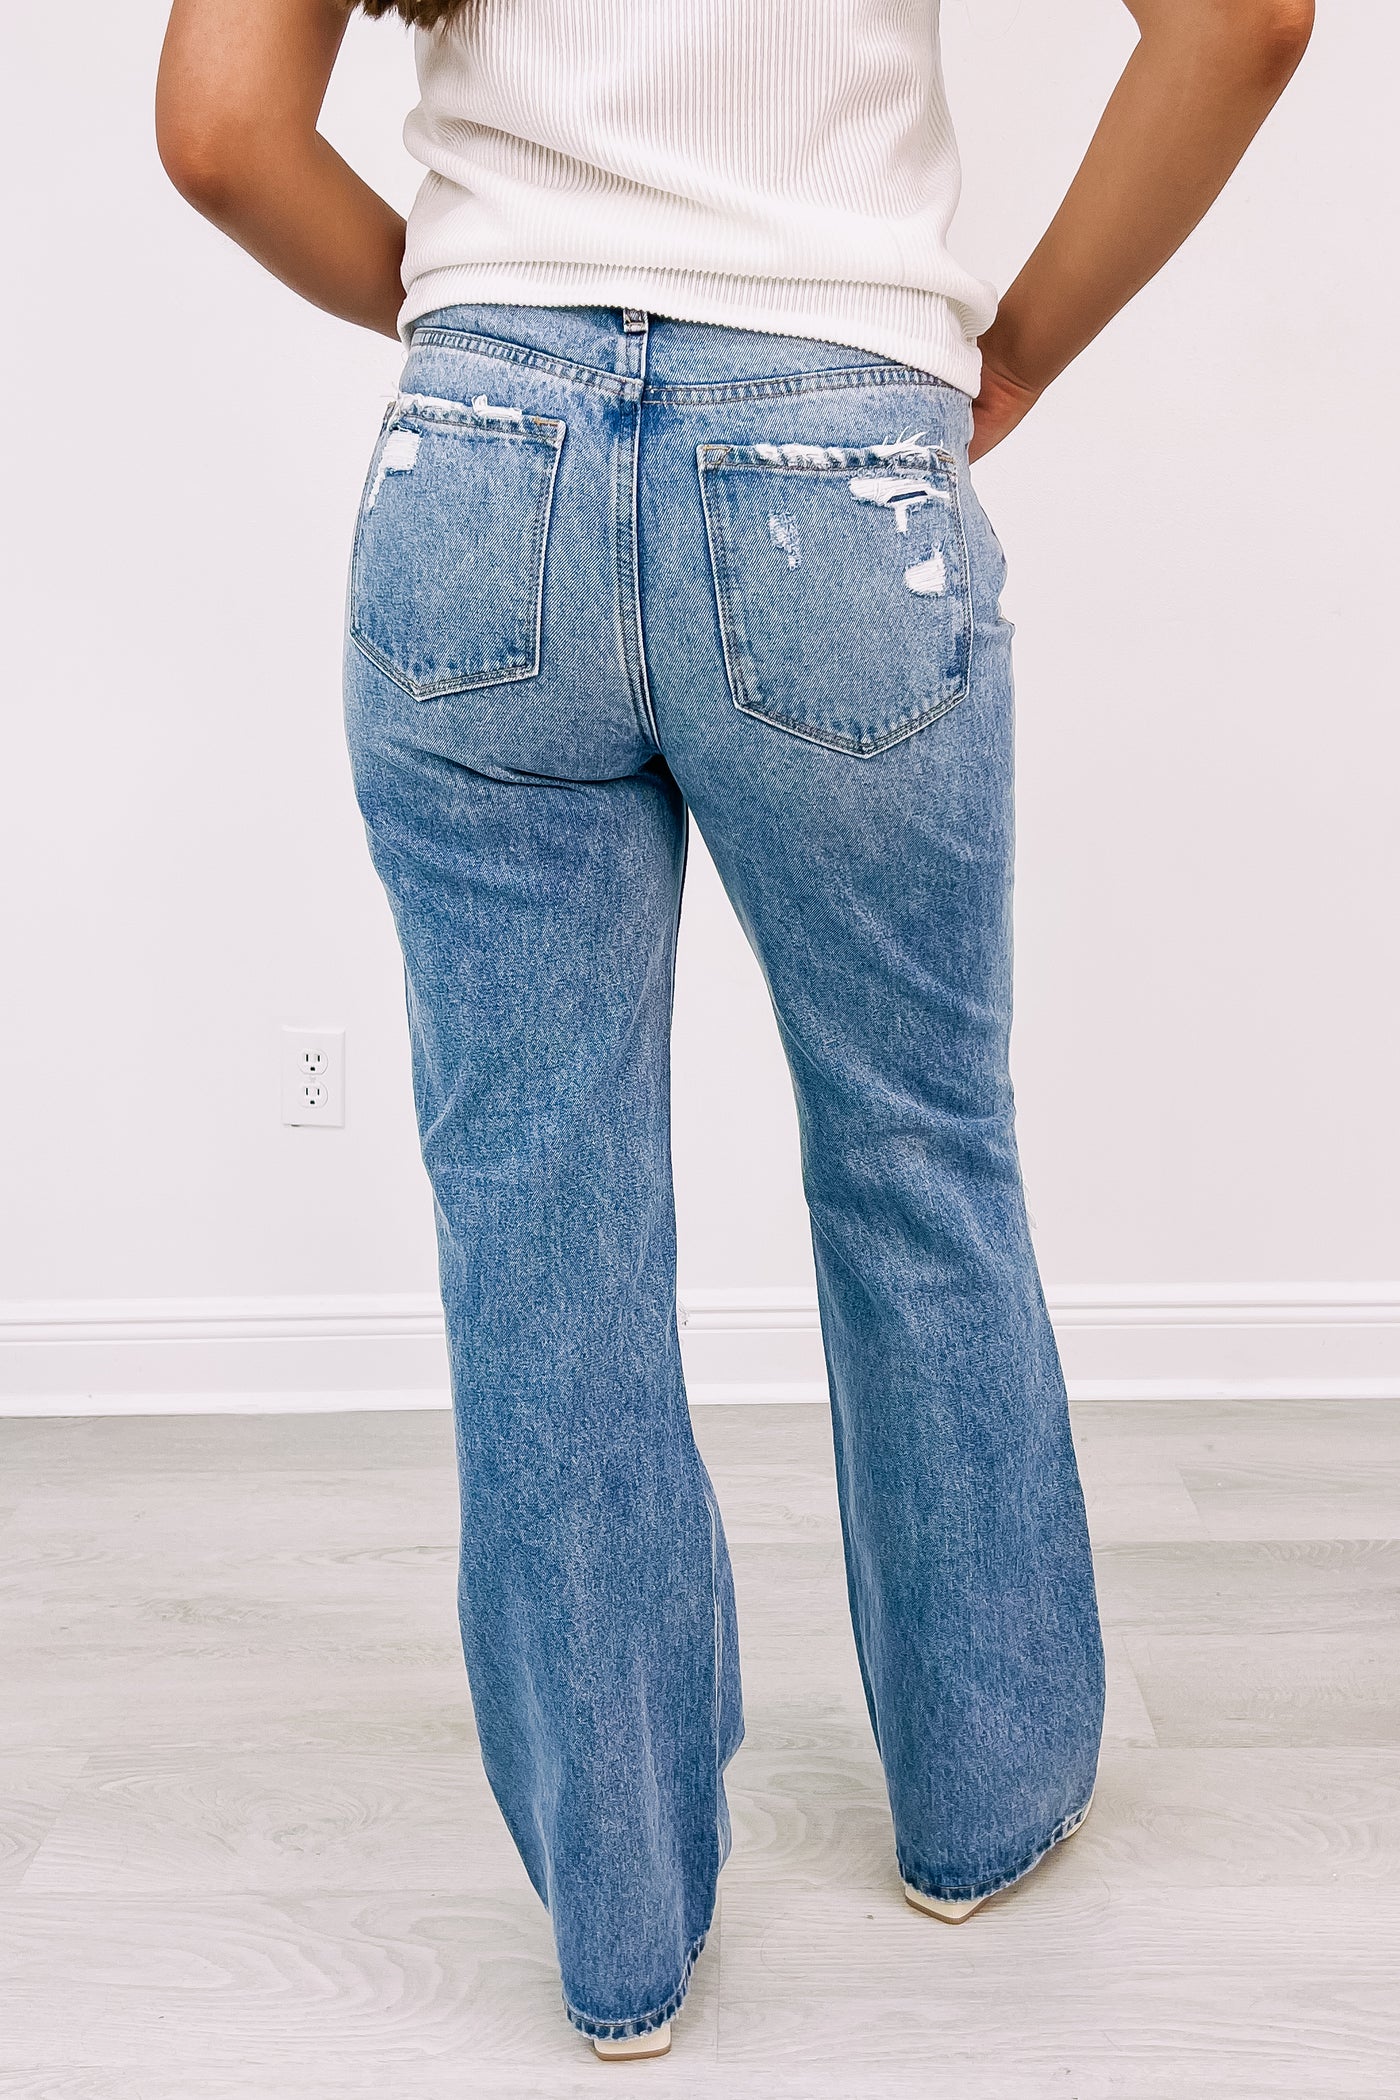 Take Me Back To The 90's Vintage Jeans